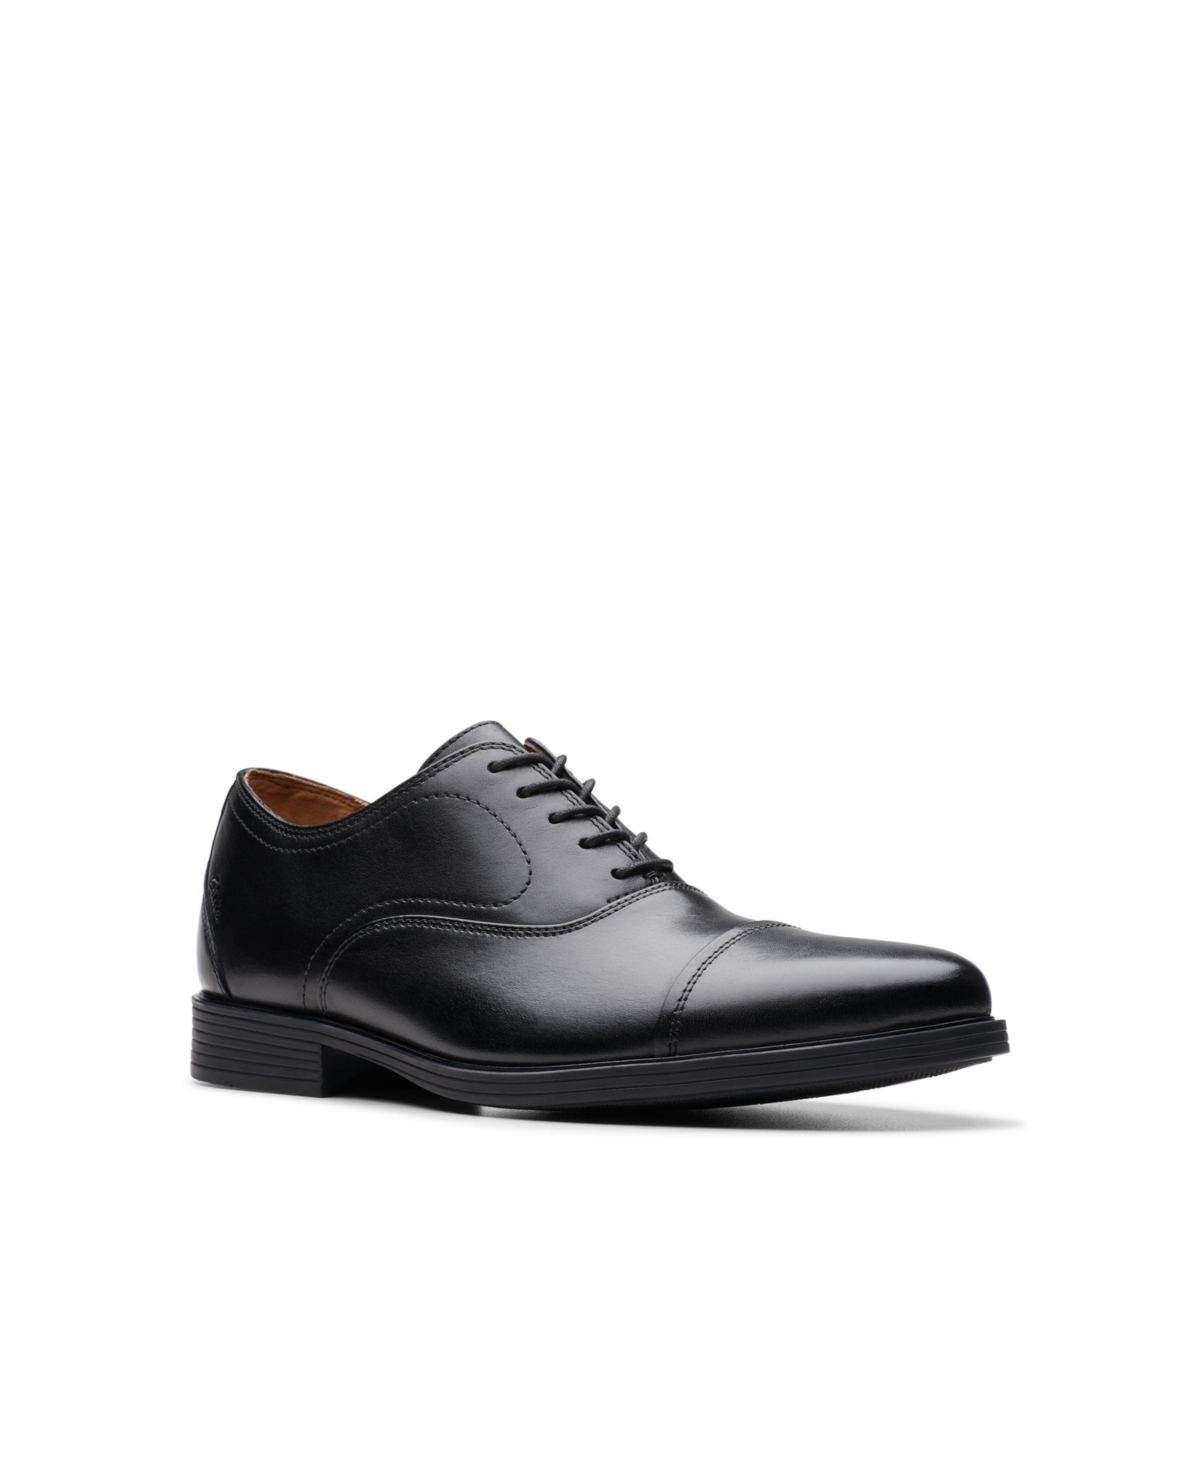 Men's Collection Whiddon Lace Up Oxford Dress Shoe - Black Leather